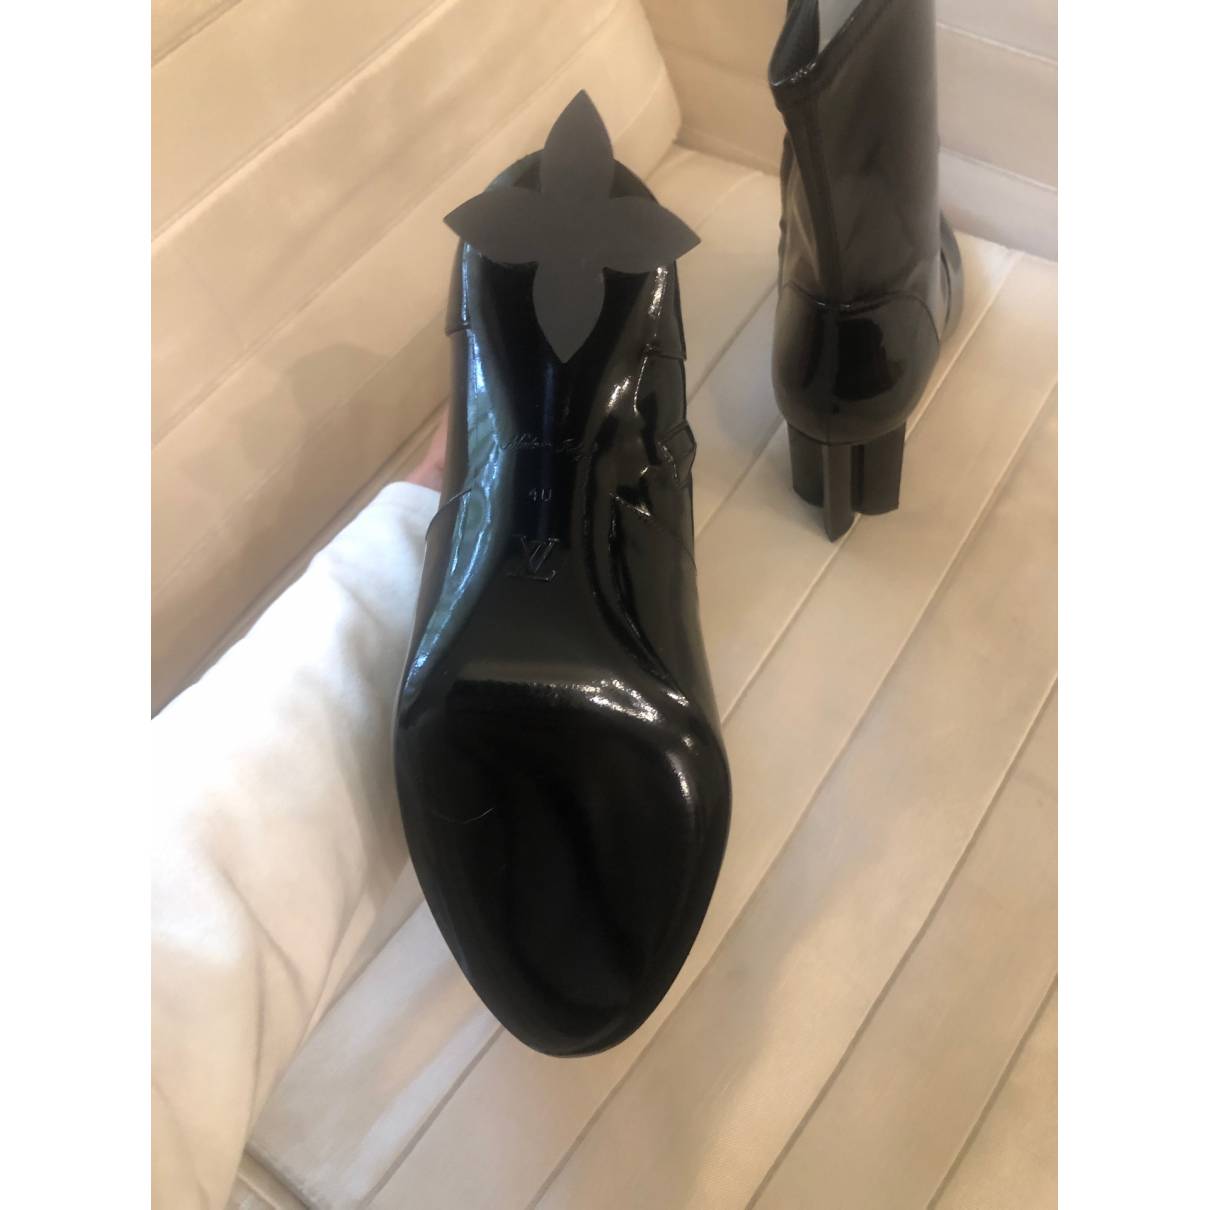 Silhouette leather ankle boots Louis Vuitton Black size 39 EU in